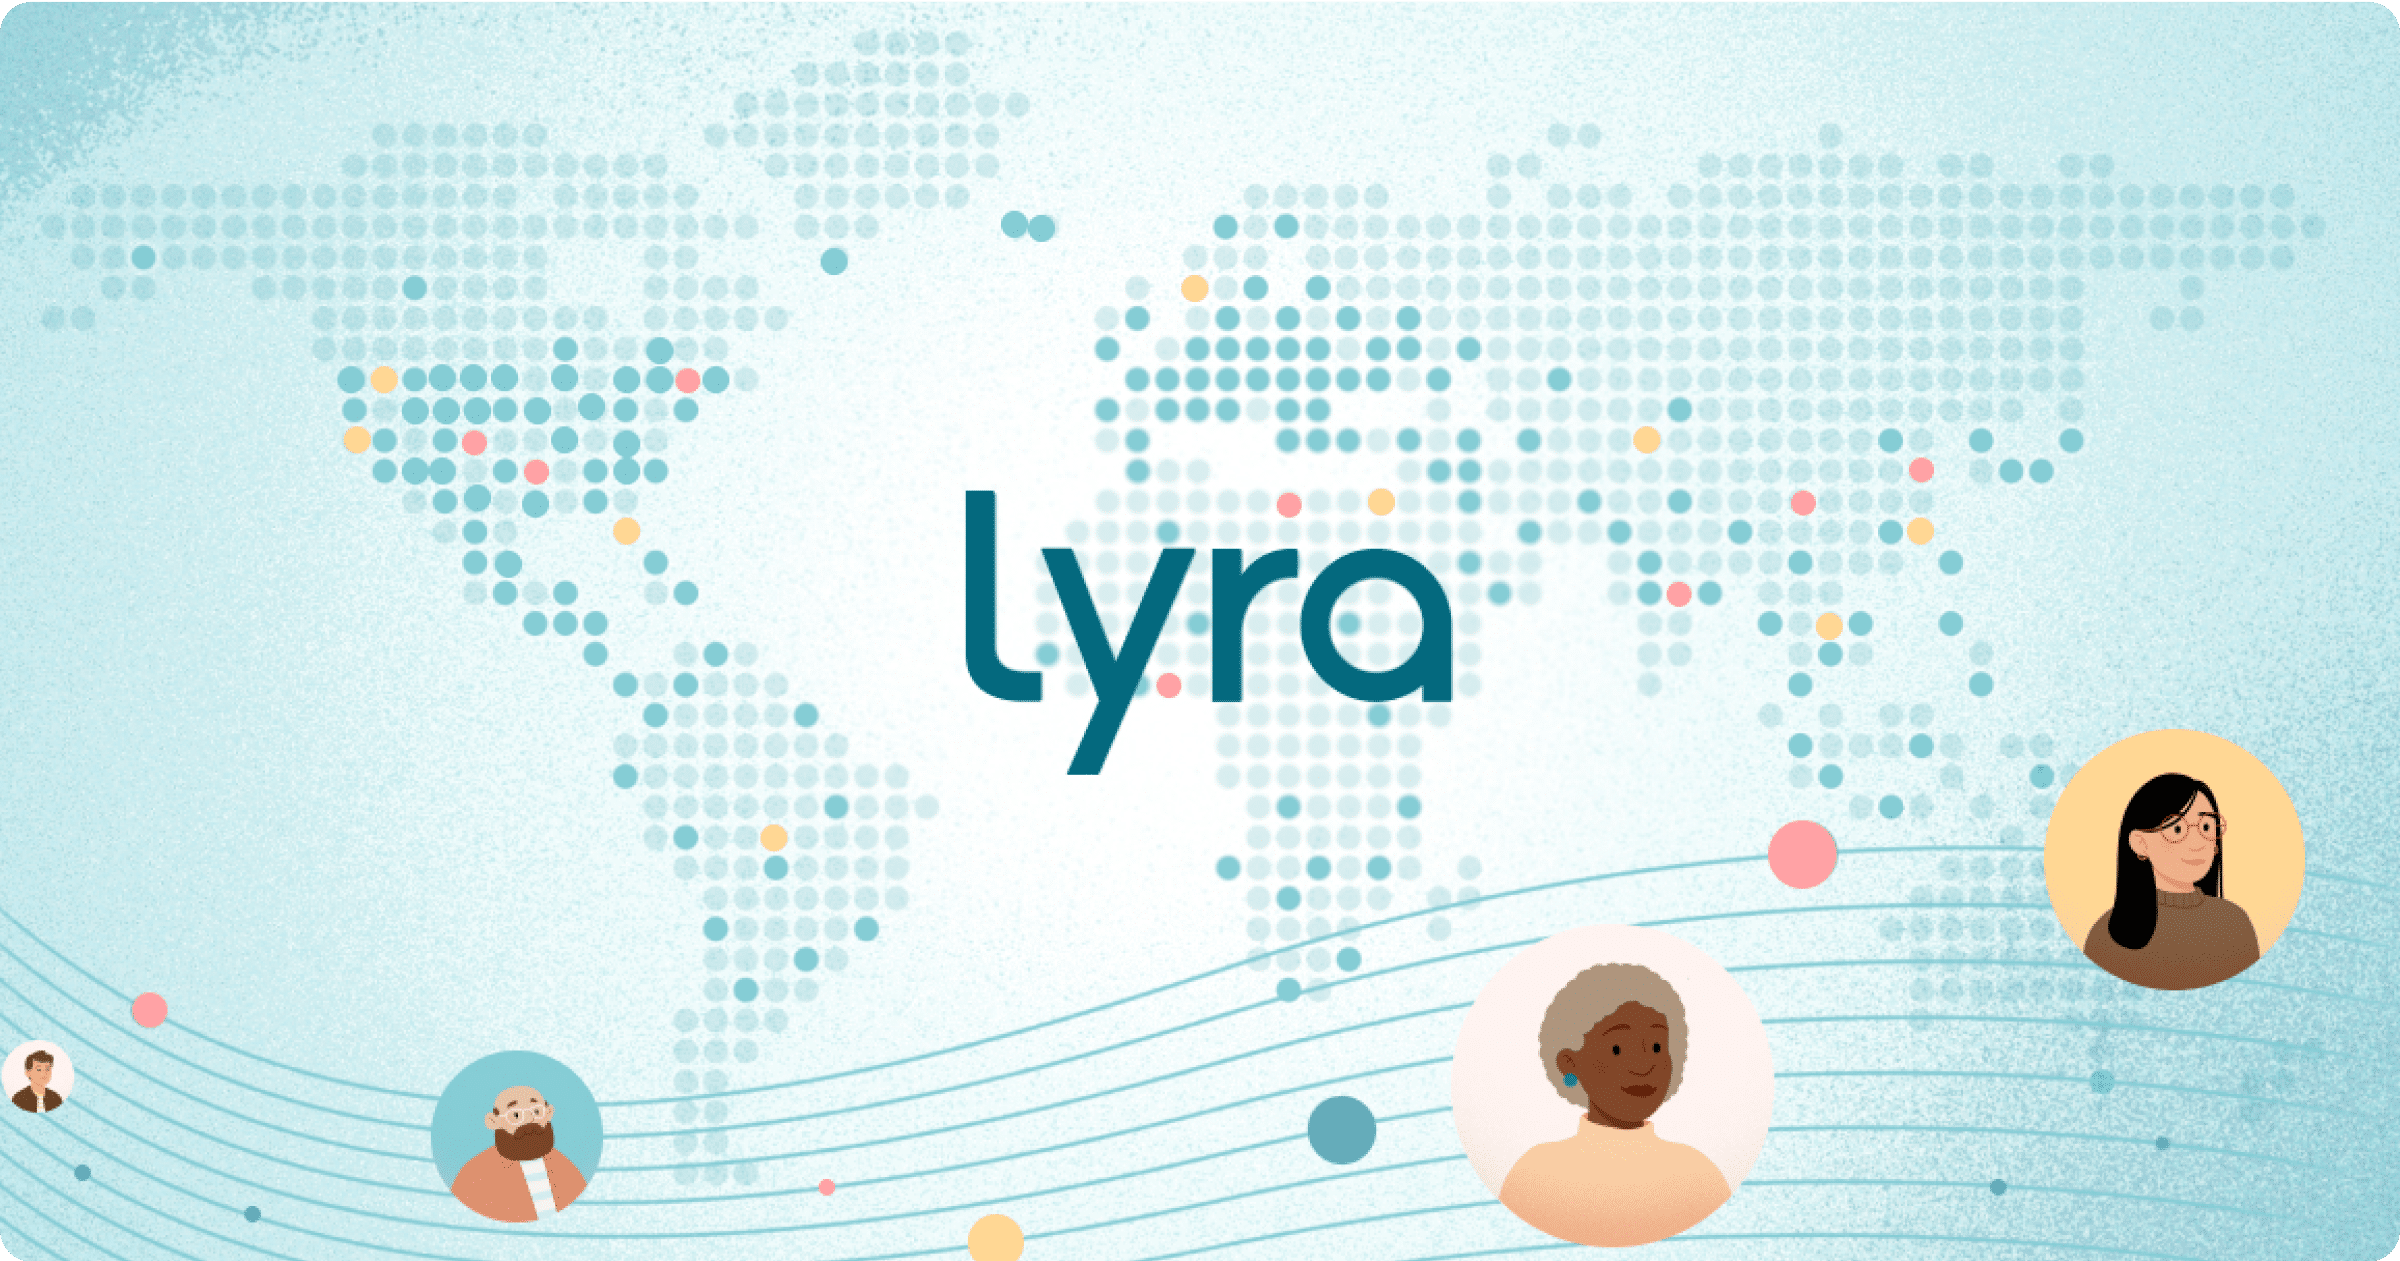 A Conversation With 3 Women Leaders at Lyra Health